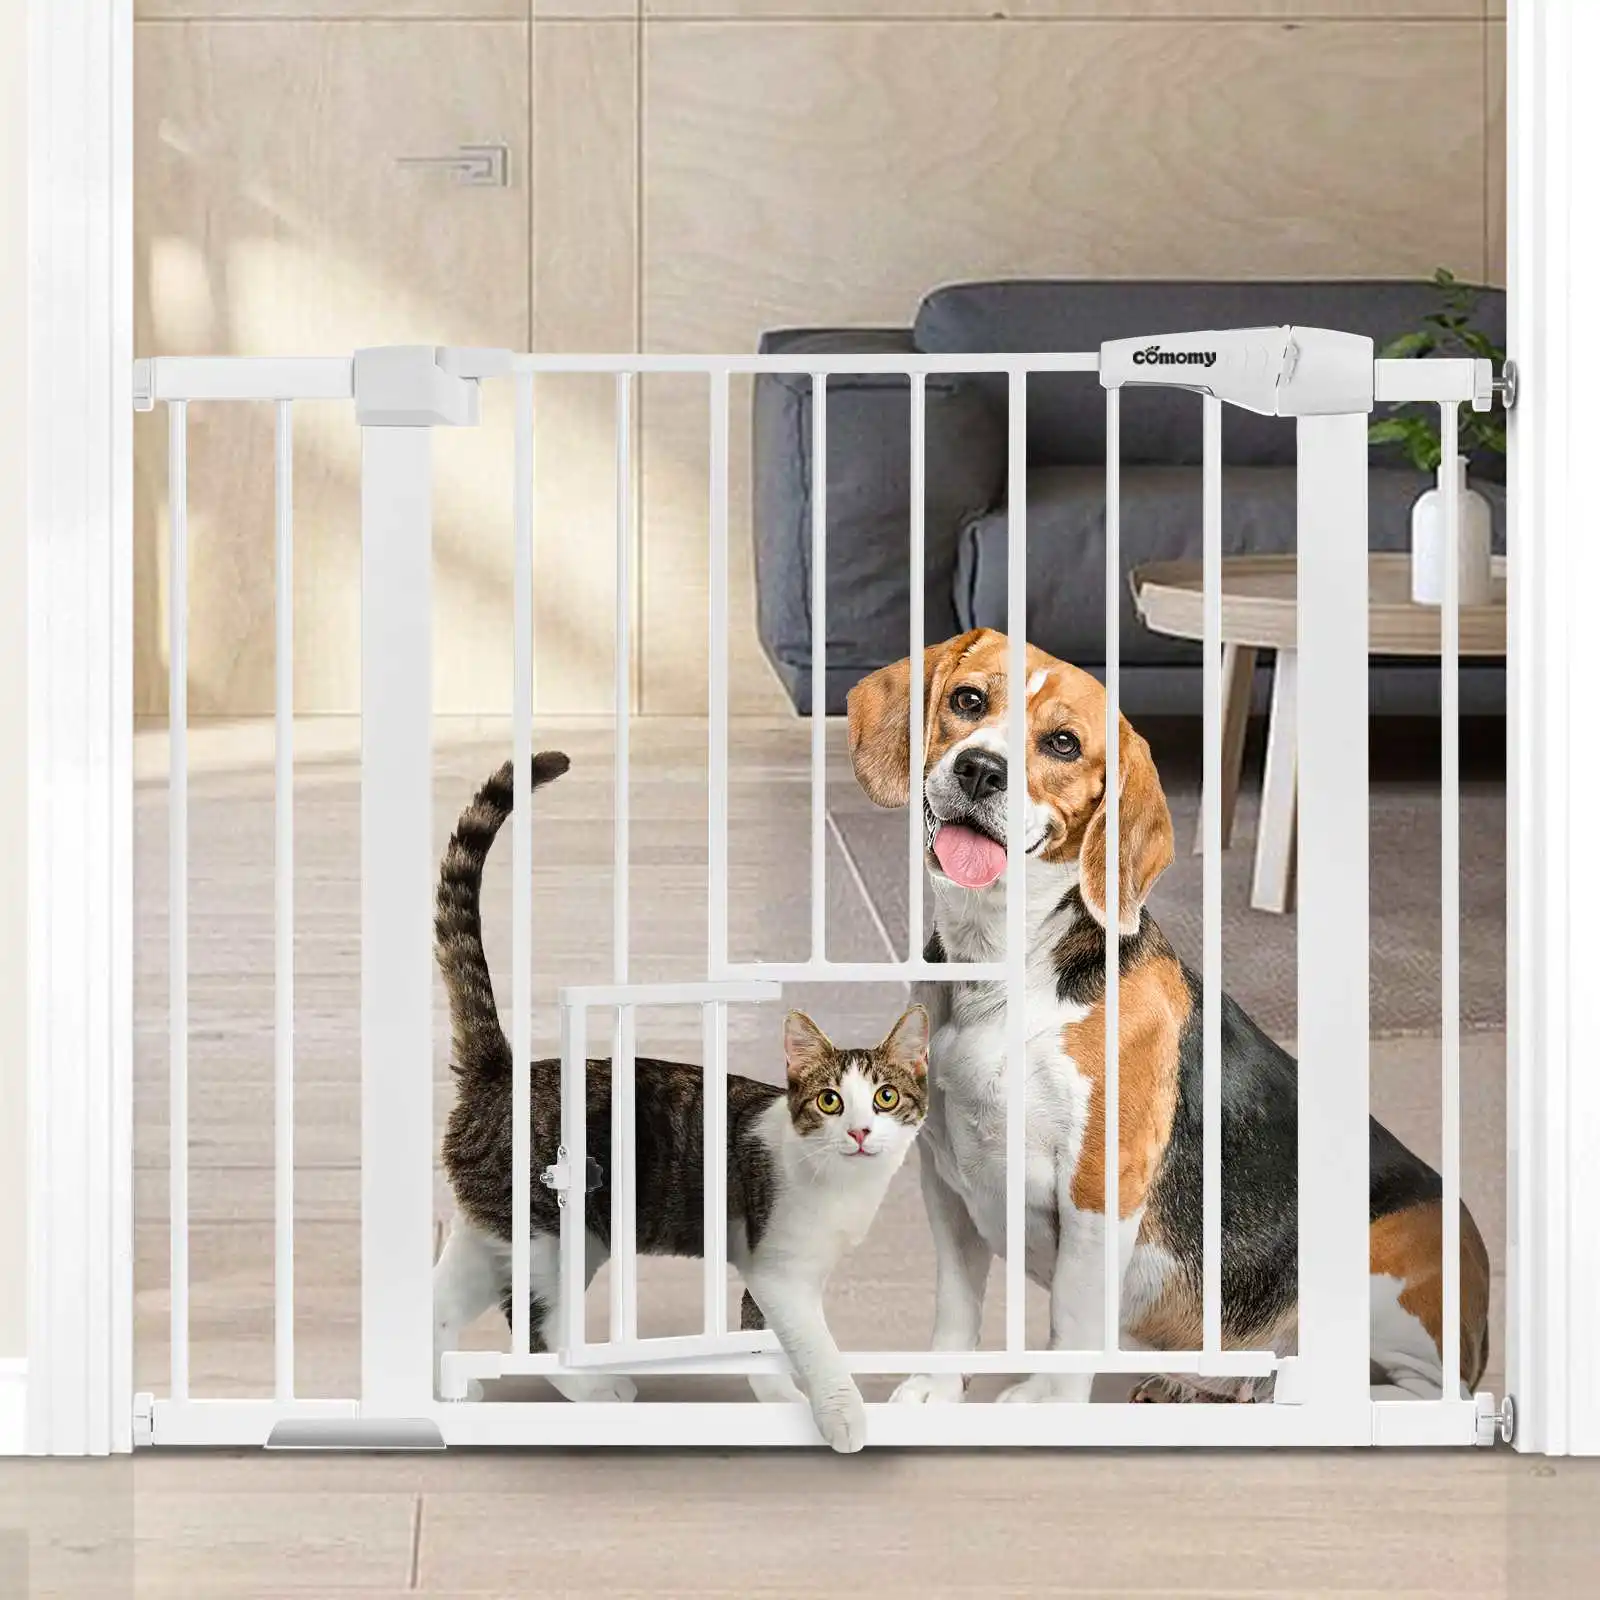 Baby Safety Gate Extra Wide Tall Children Protection Security Stairs Door fence kids Safe Doorway Gate Pets dog Isolating Fence